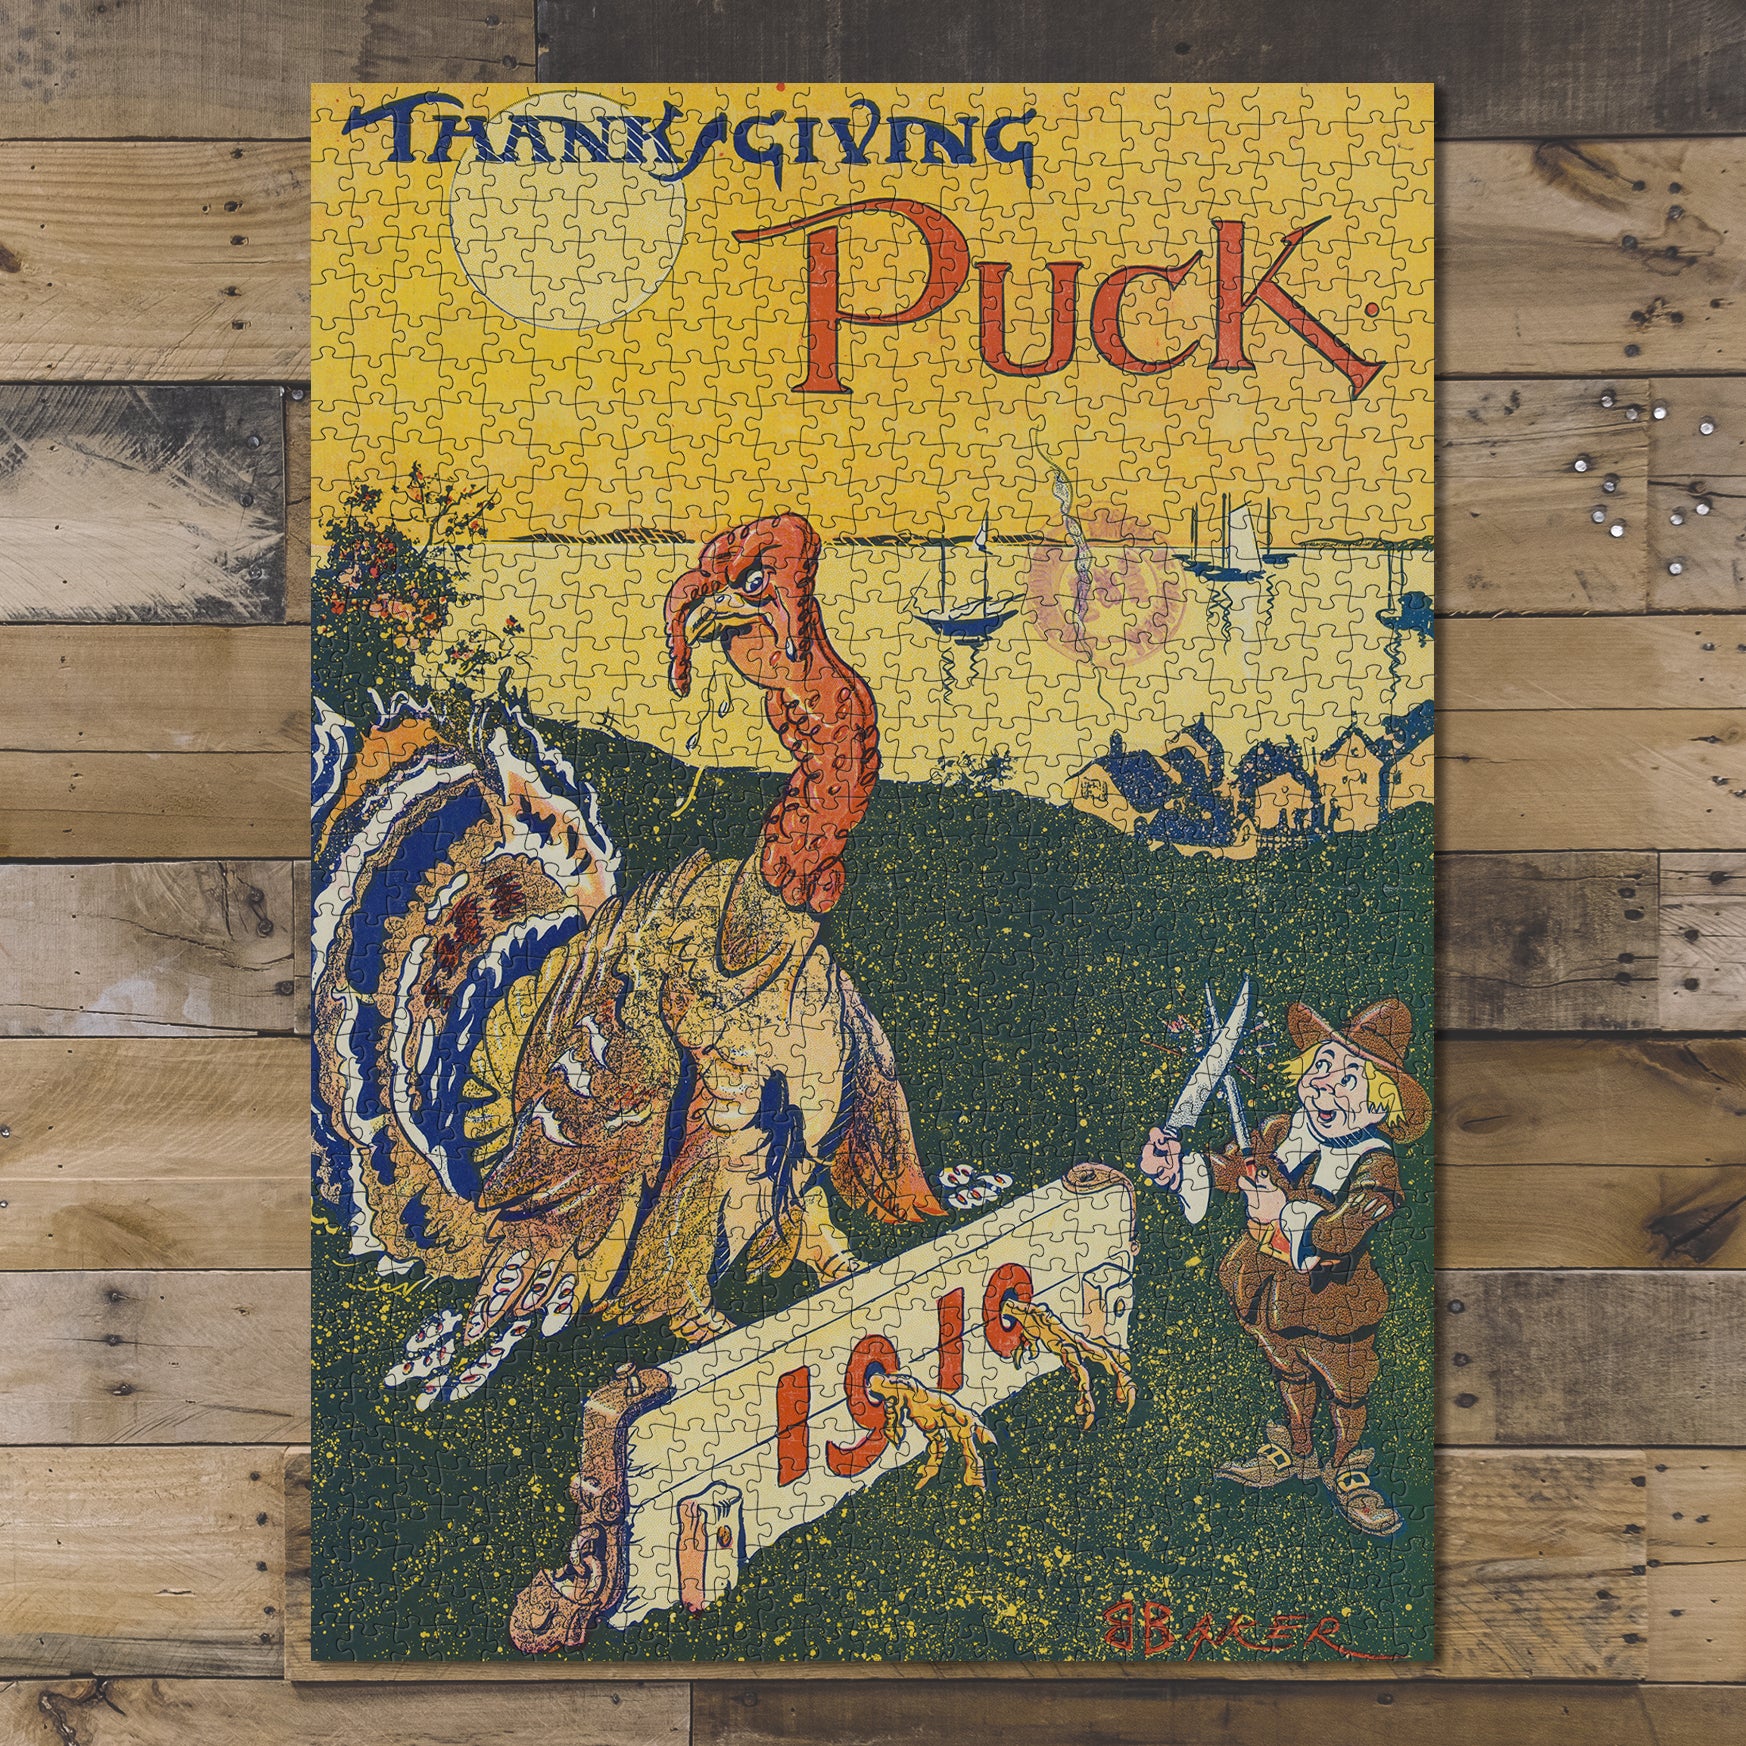 1000 piece puzzle 1910 Thanksgiving Puck boy sharpening knife large turkey with its feet in stocks